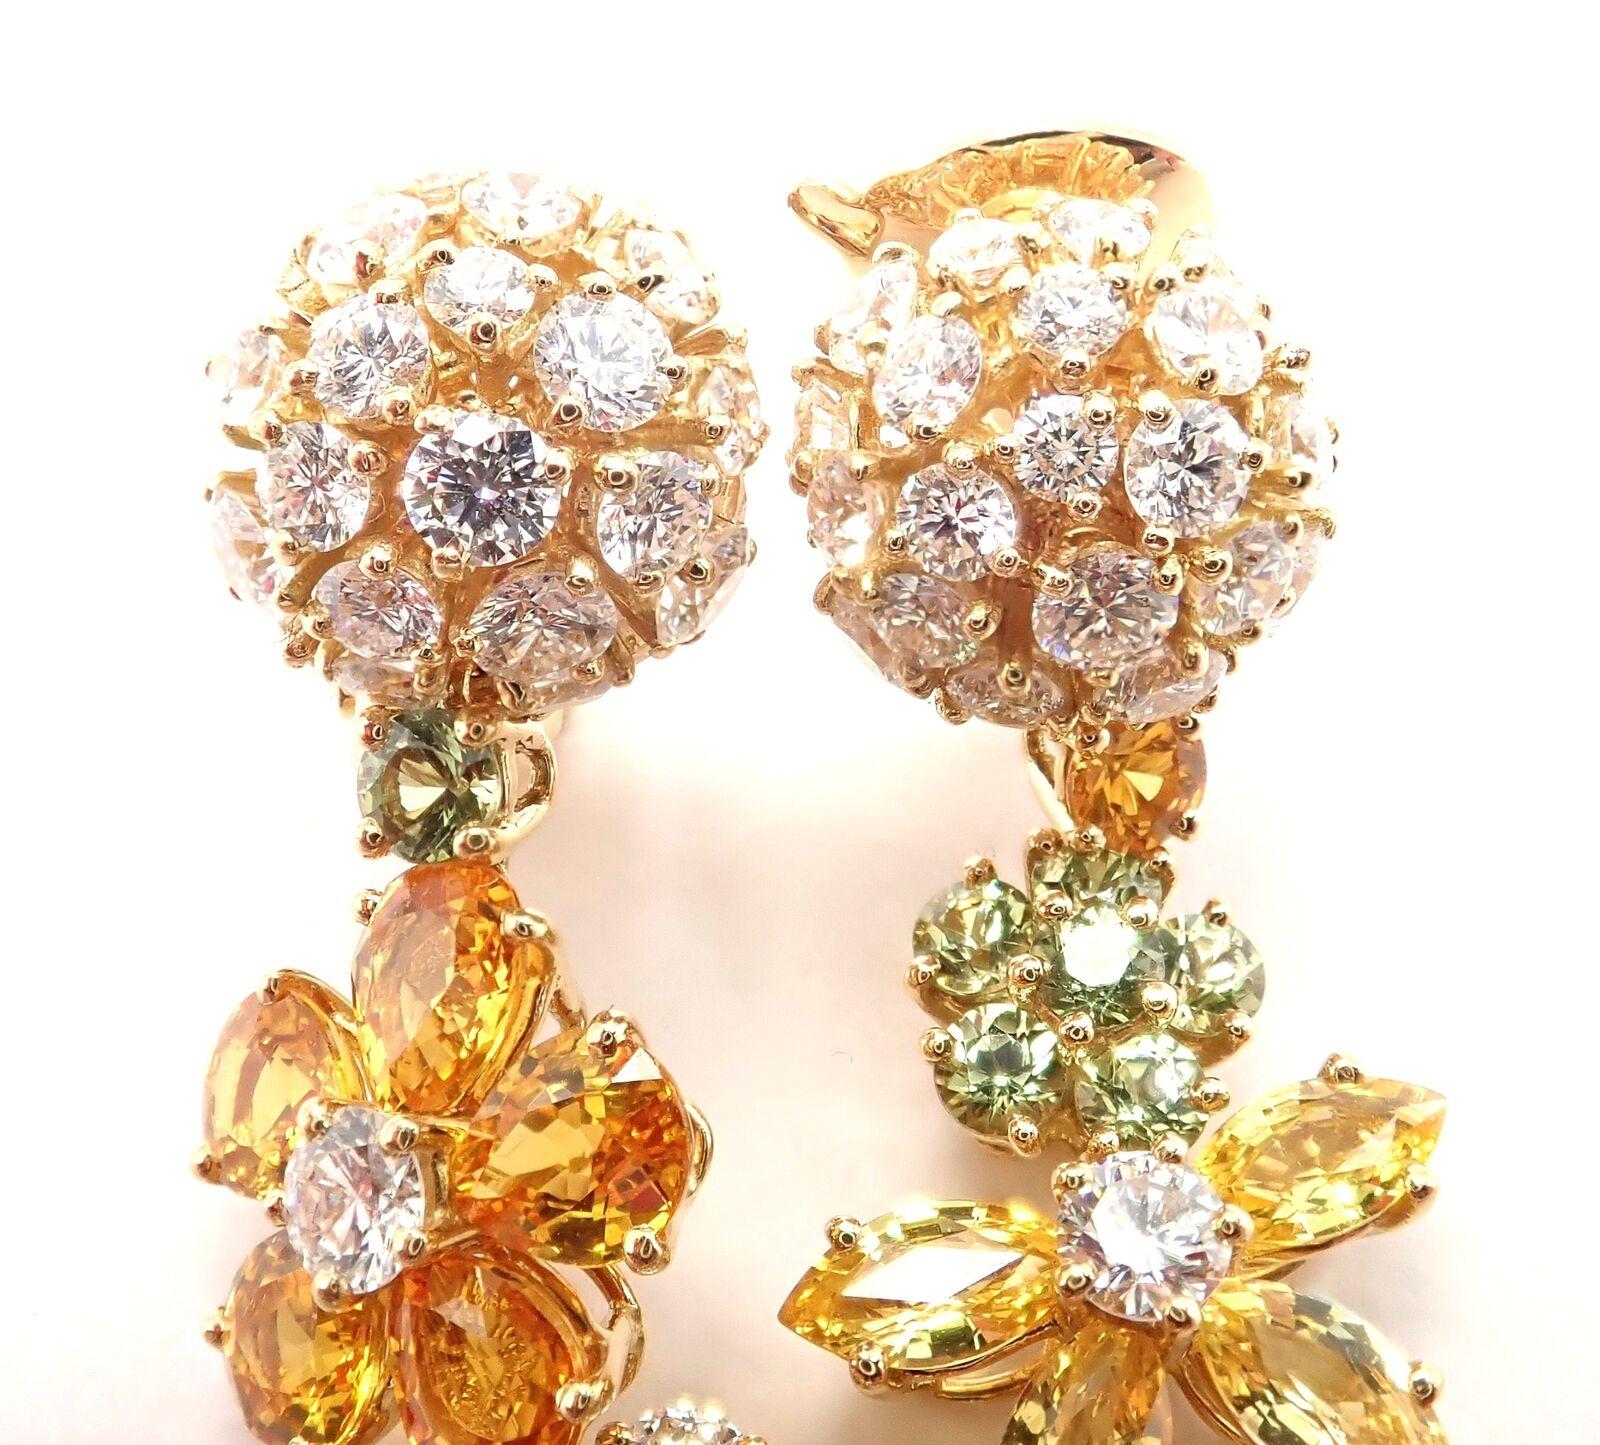 18k Yellow Gold Folies des Pres Diamond Yellow, Green, Orange Sapphire  Earrings by Van Cleef & Arpels.
With 64 round brilliant cut diamonds VVS1 clarity, E color total weight approximately 3.15ct
Round, Pear, Marque shapes Yellow, Green, Orange